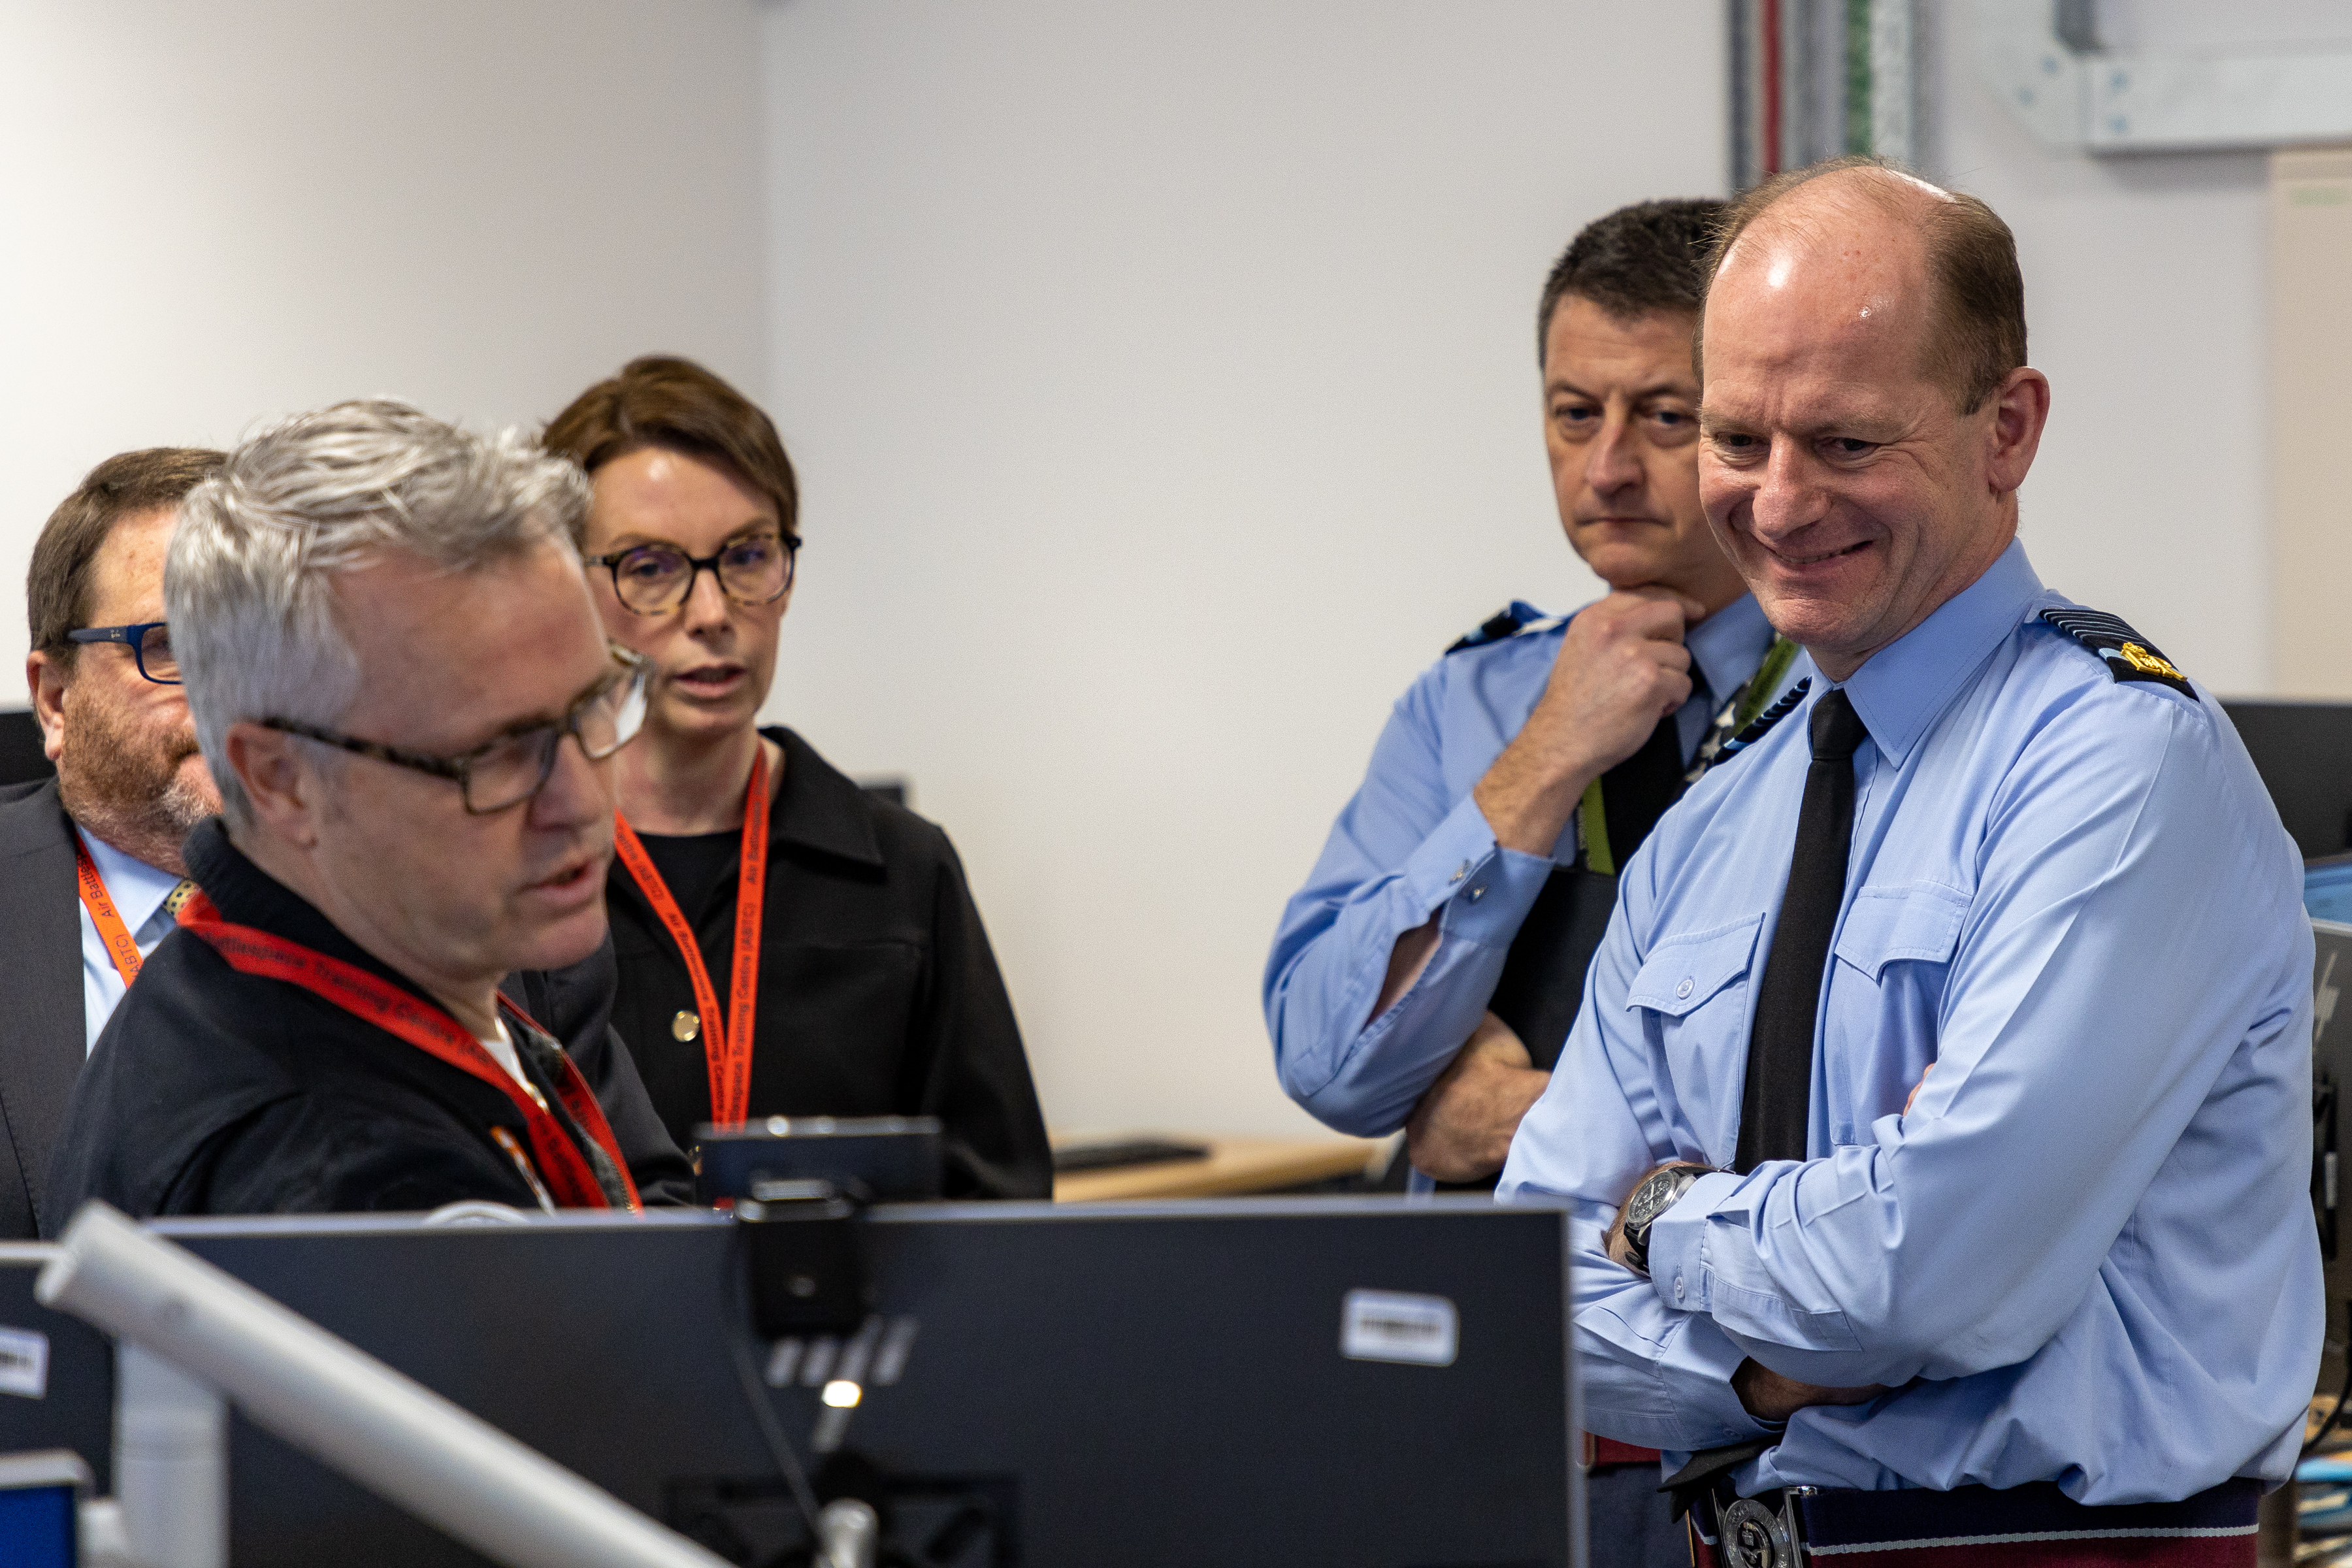 Image shows the Chief of the Air Staff with RAF aviators and civilians looking at desktop computers.